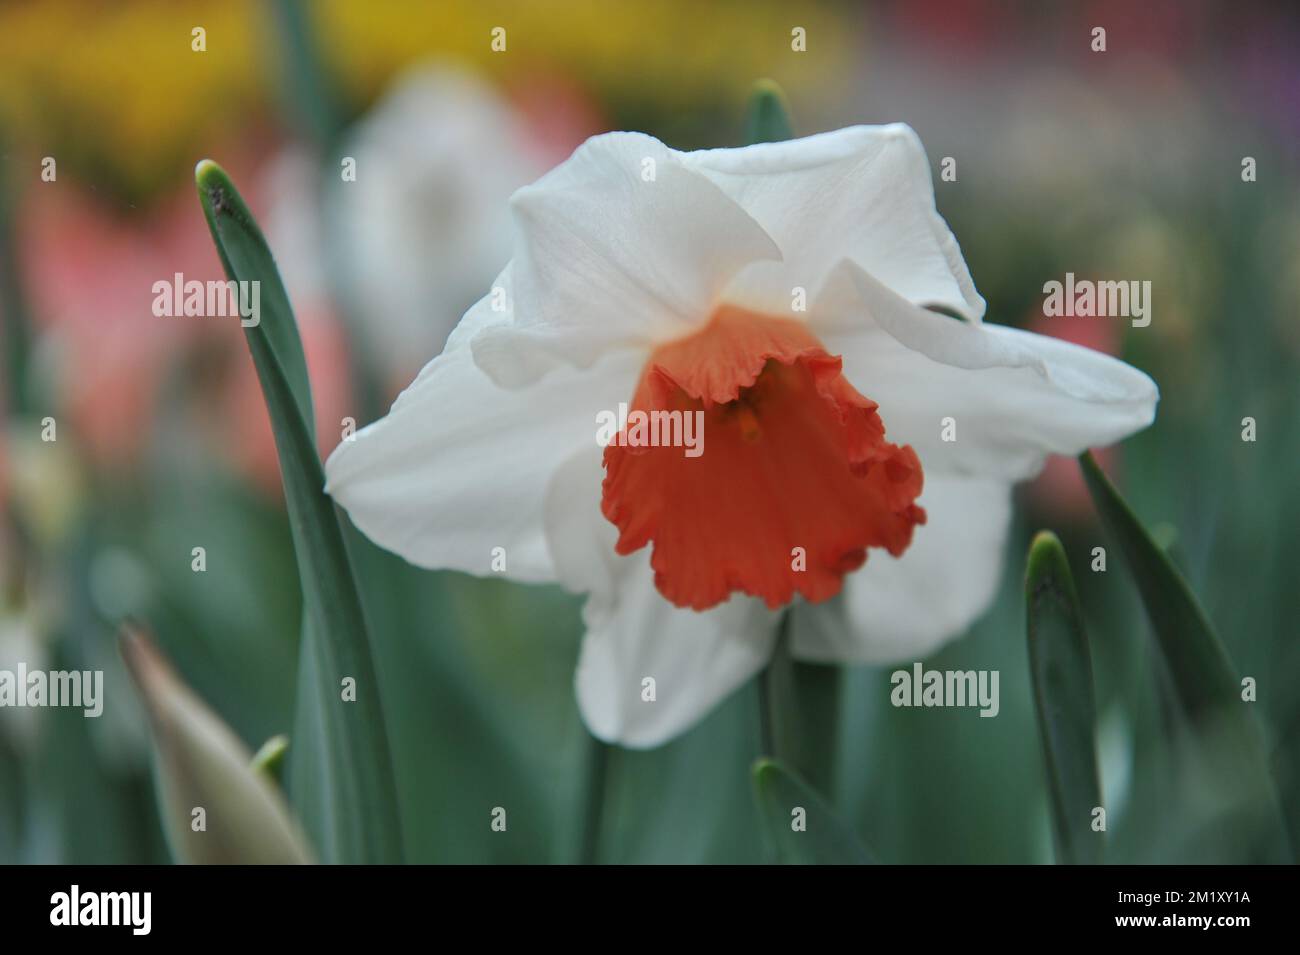 White and orange Large-Cupped daffodils (Narcissus) Decoy bloom in a garden in April Stock Photo